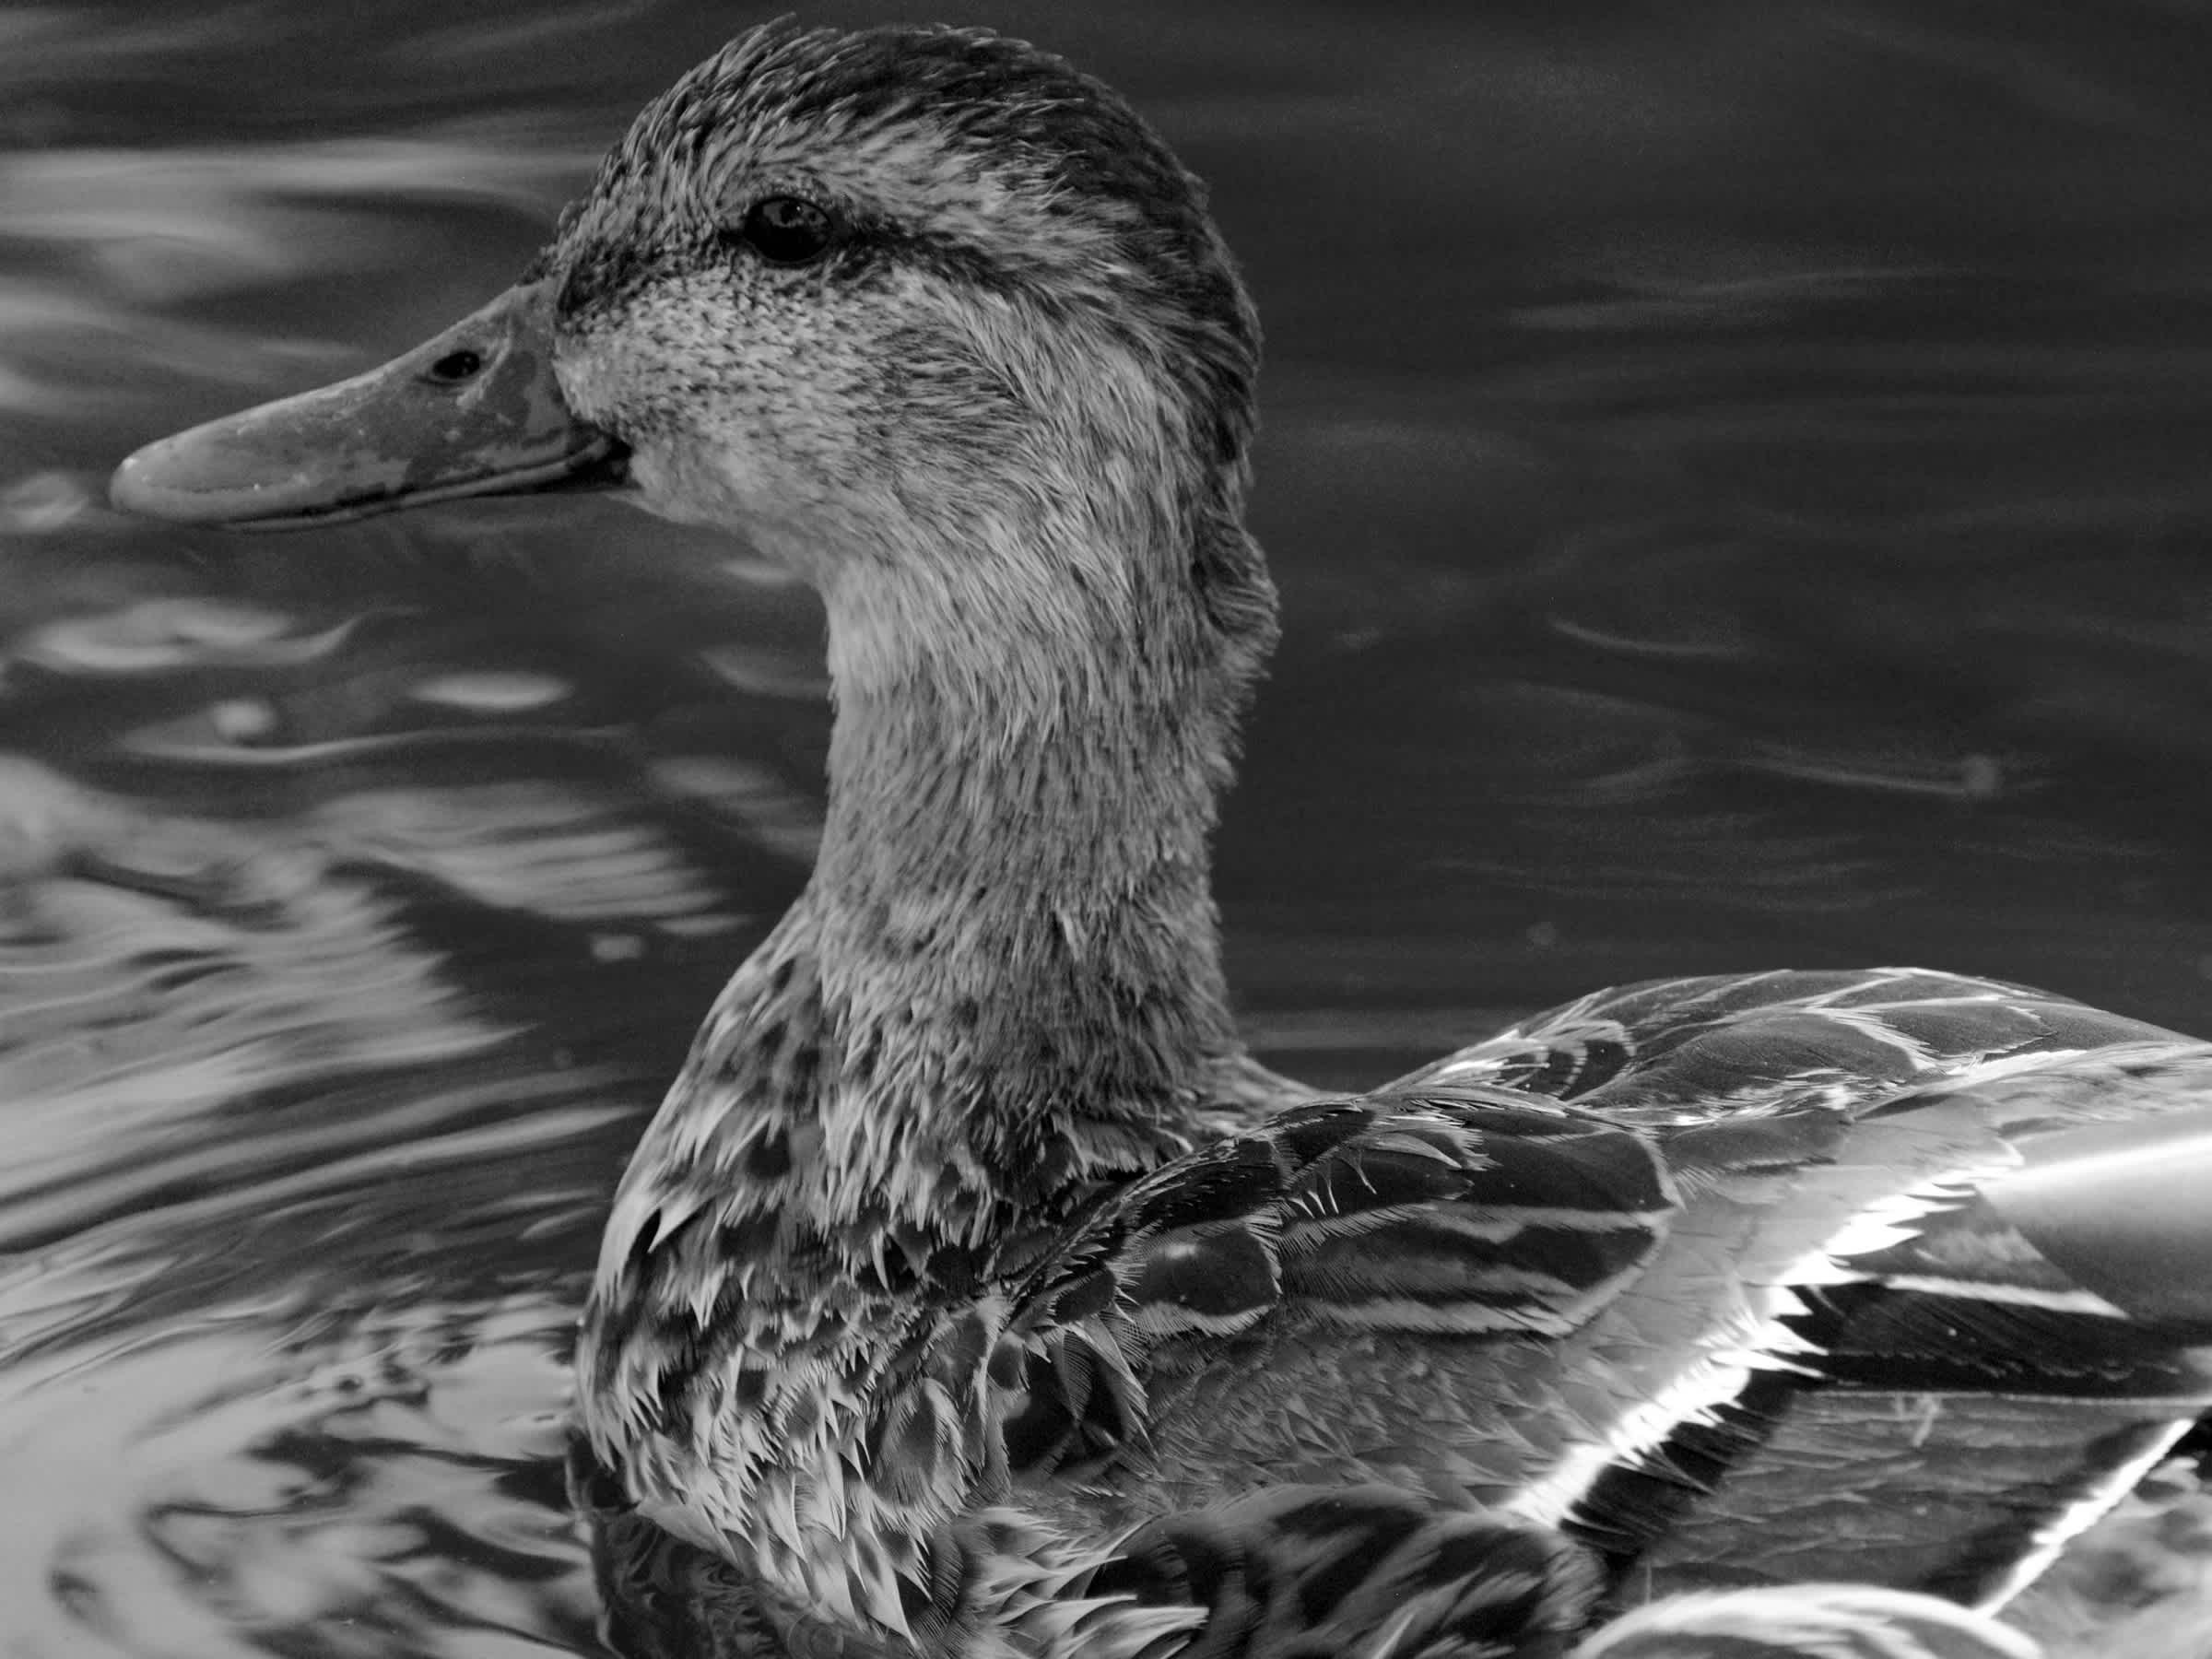 Duck swimming in black and white.